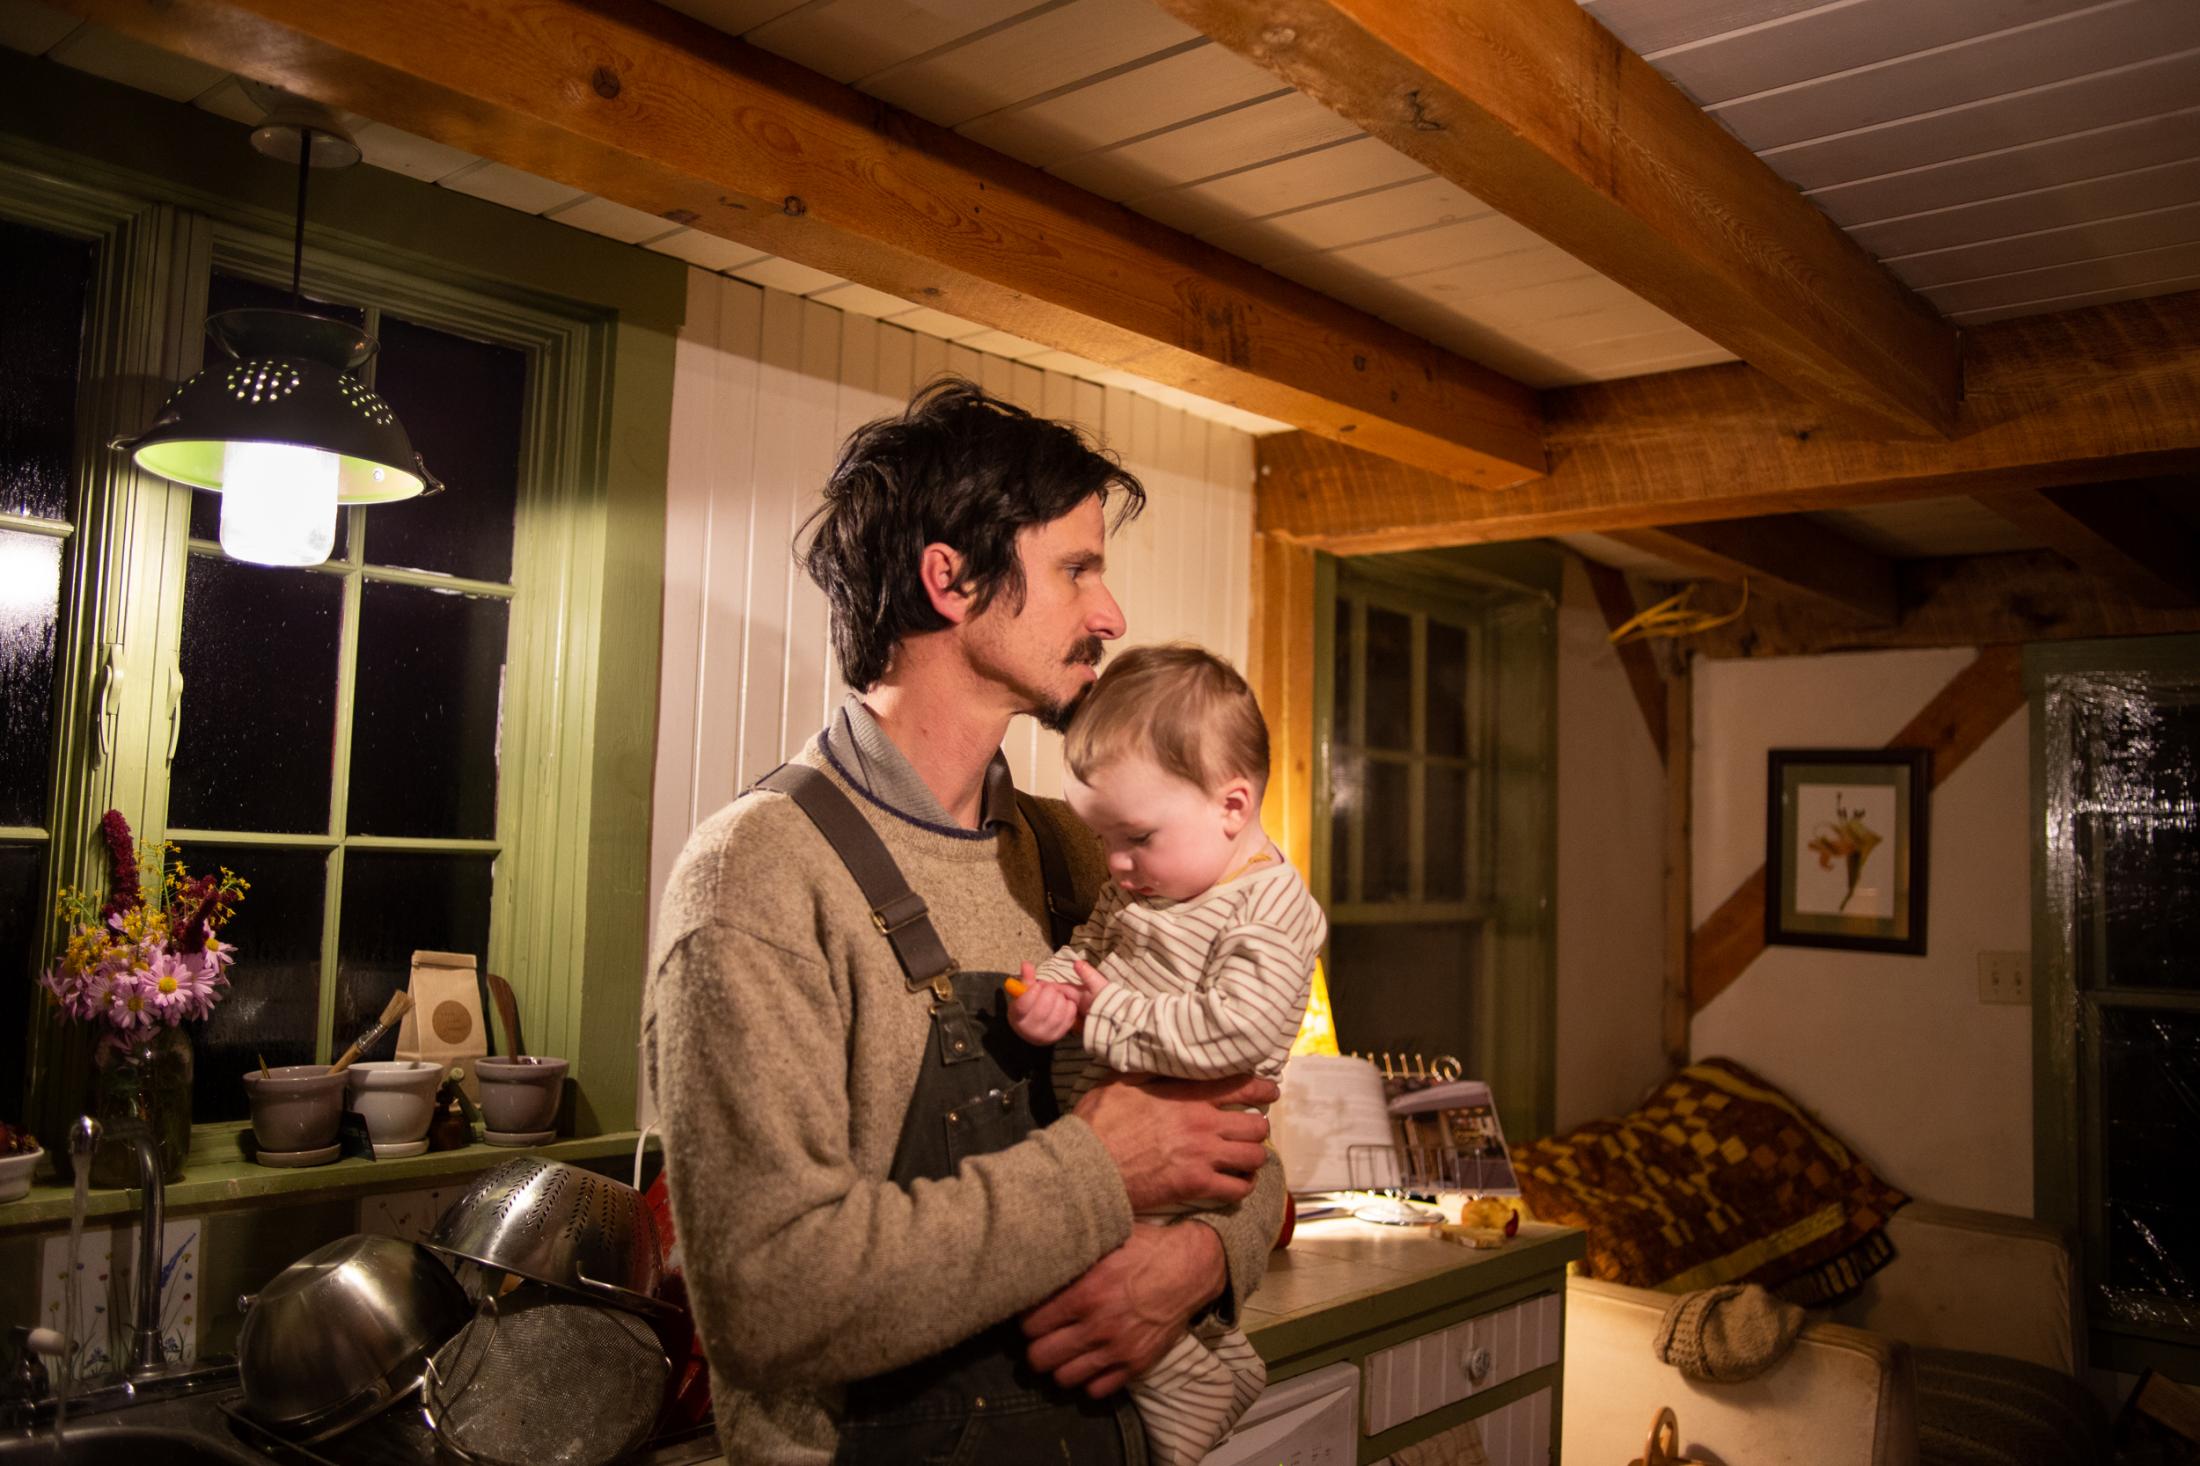 David holds his son before bed, Bremen, Maine, 2014.